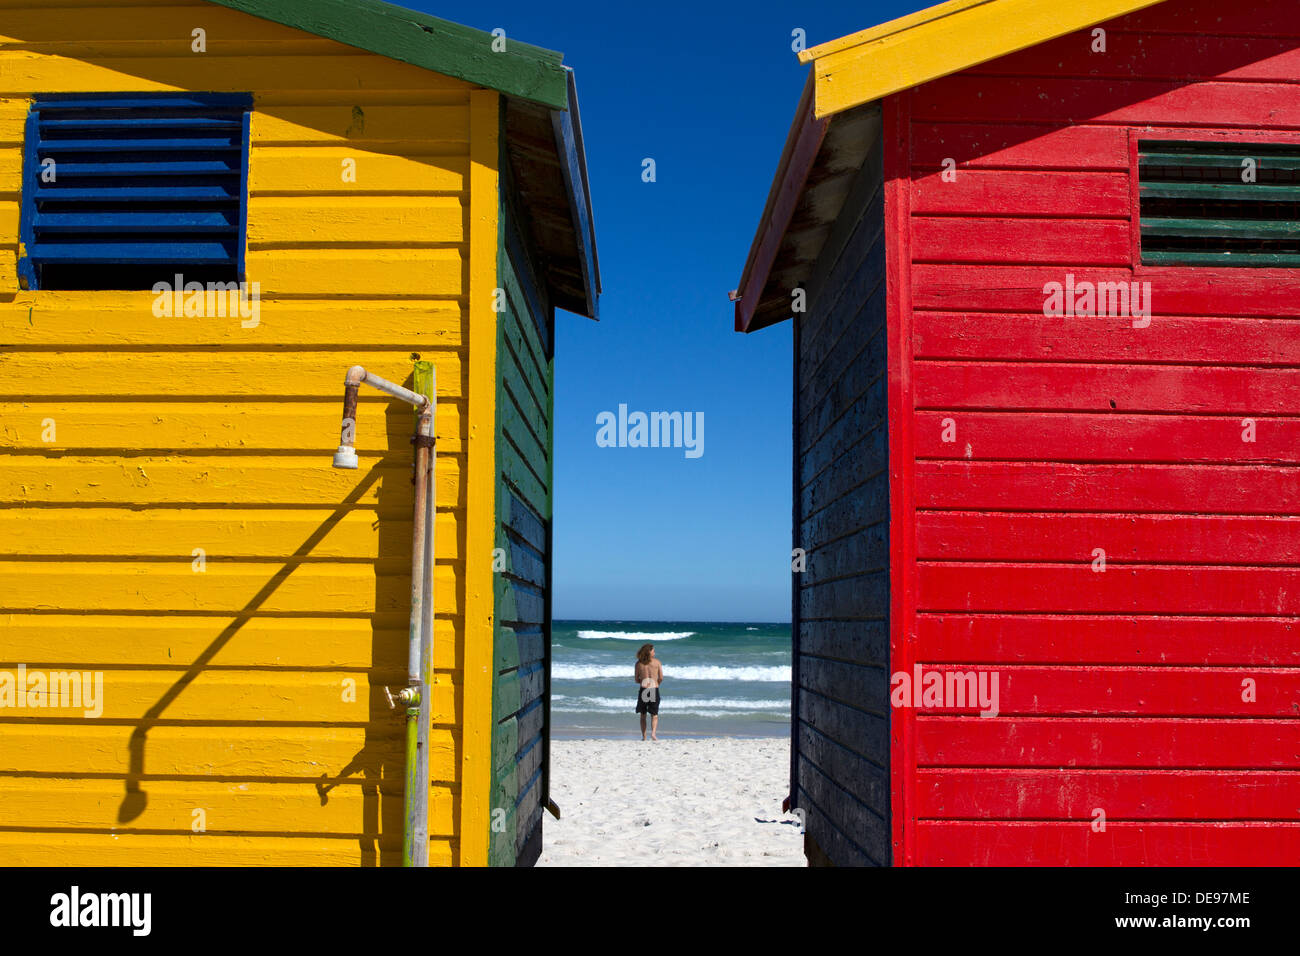 Painted beach huts on Muizenberg Beach, South Africa. Stock Photo